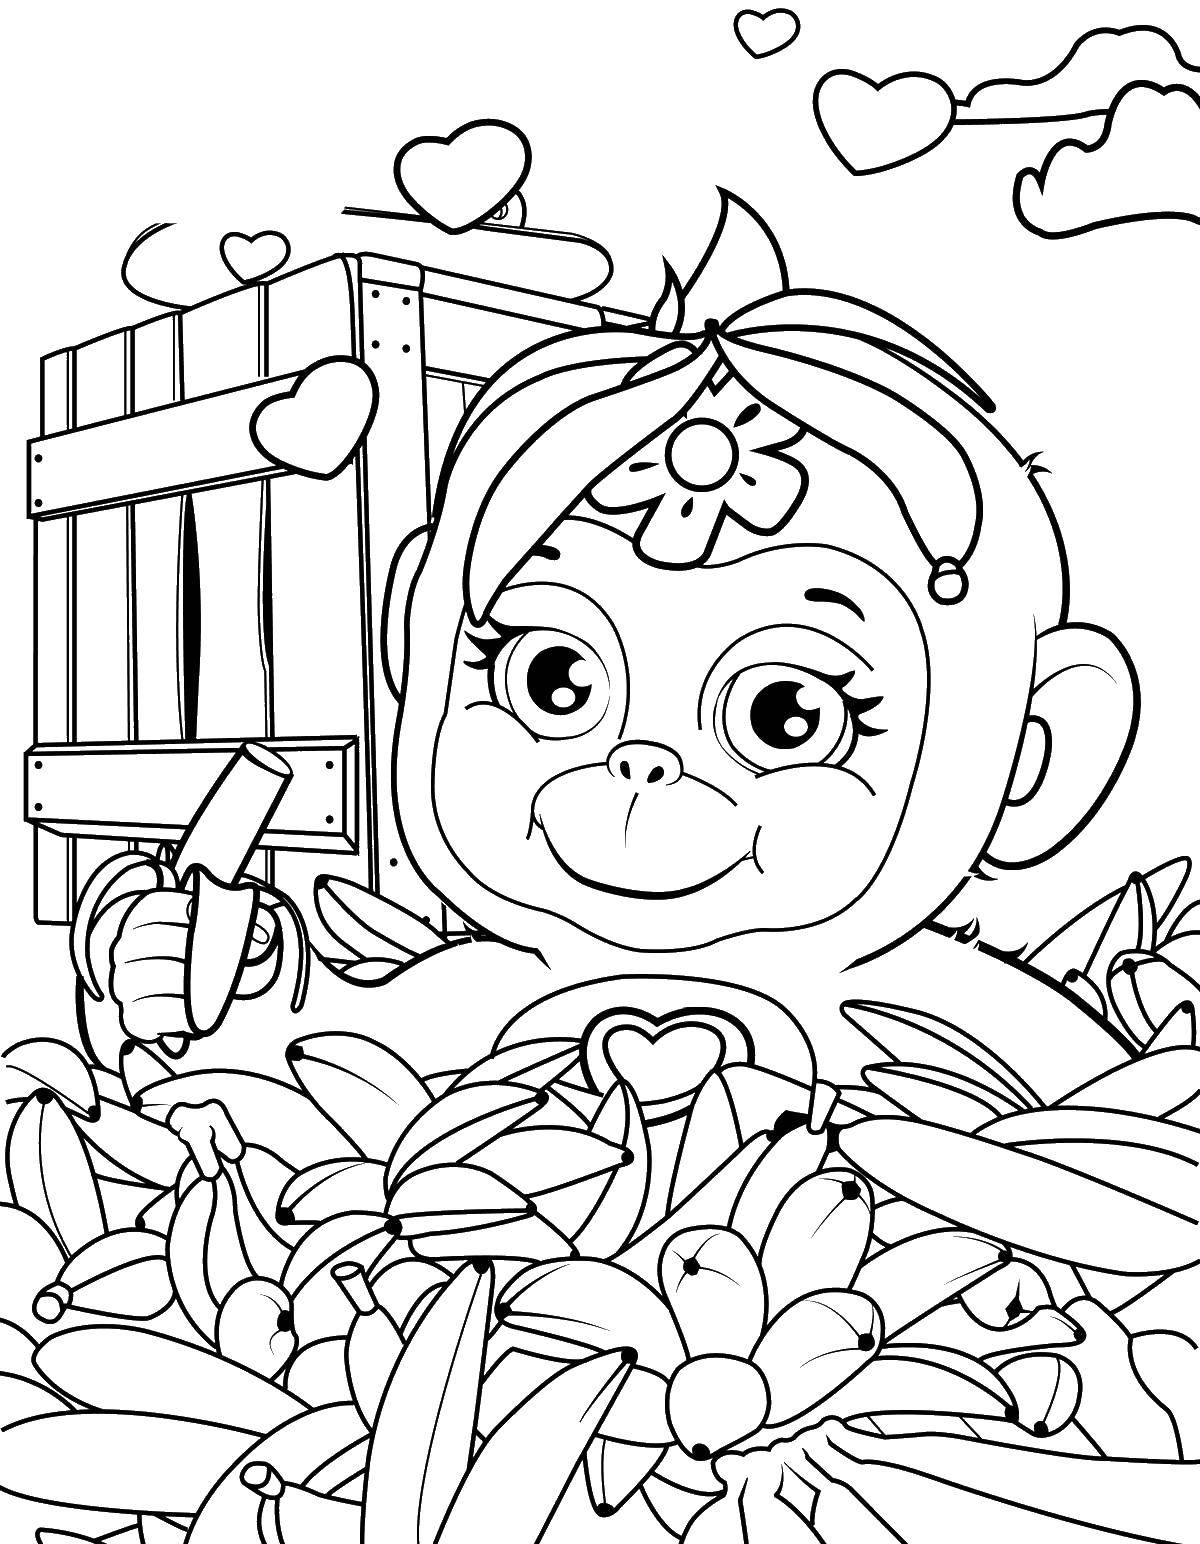 Coloring Little monkey. Category Animals. Tags:  animals, APE, monkey, bananas.